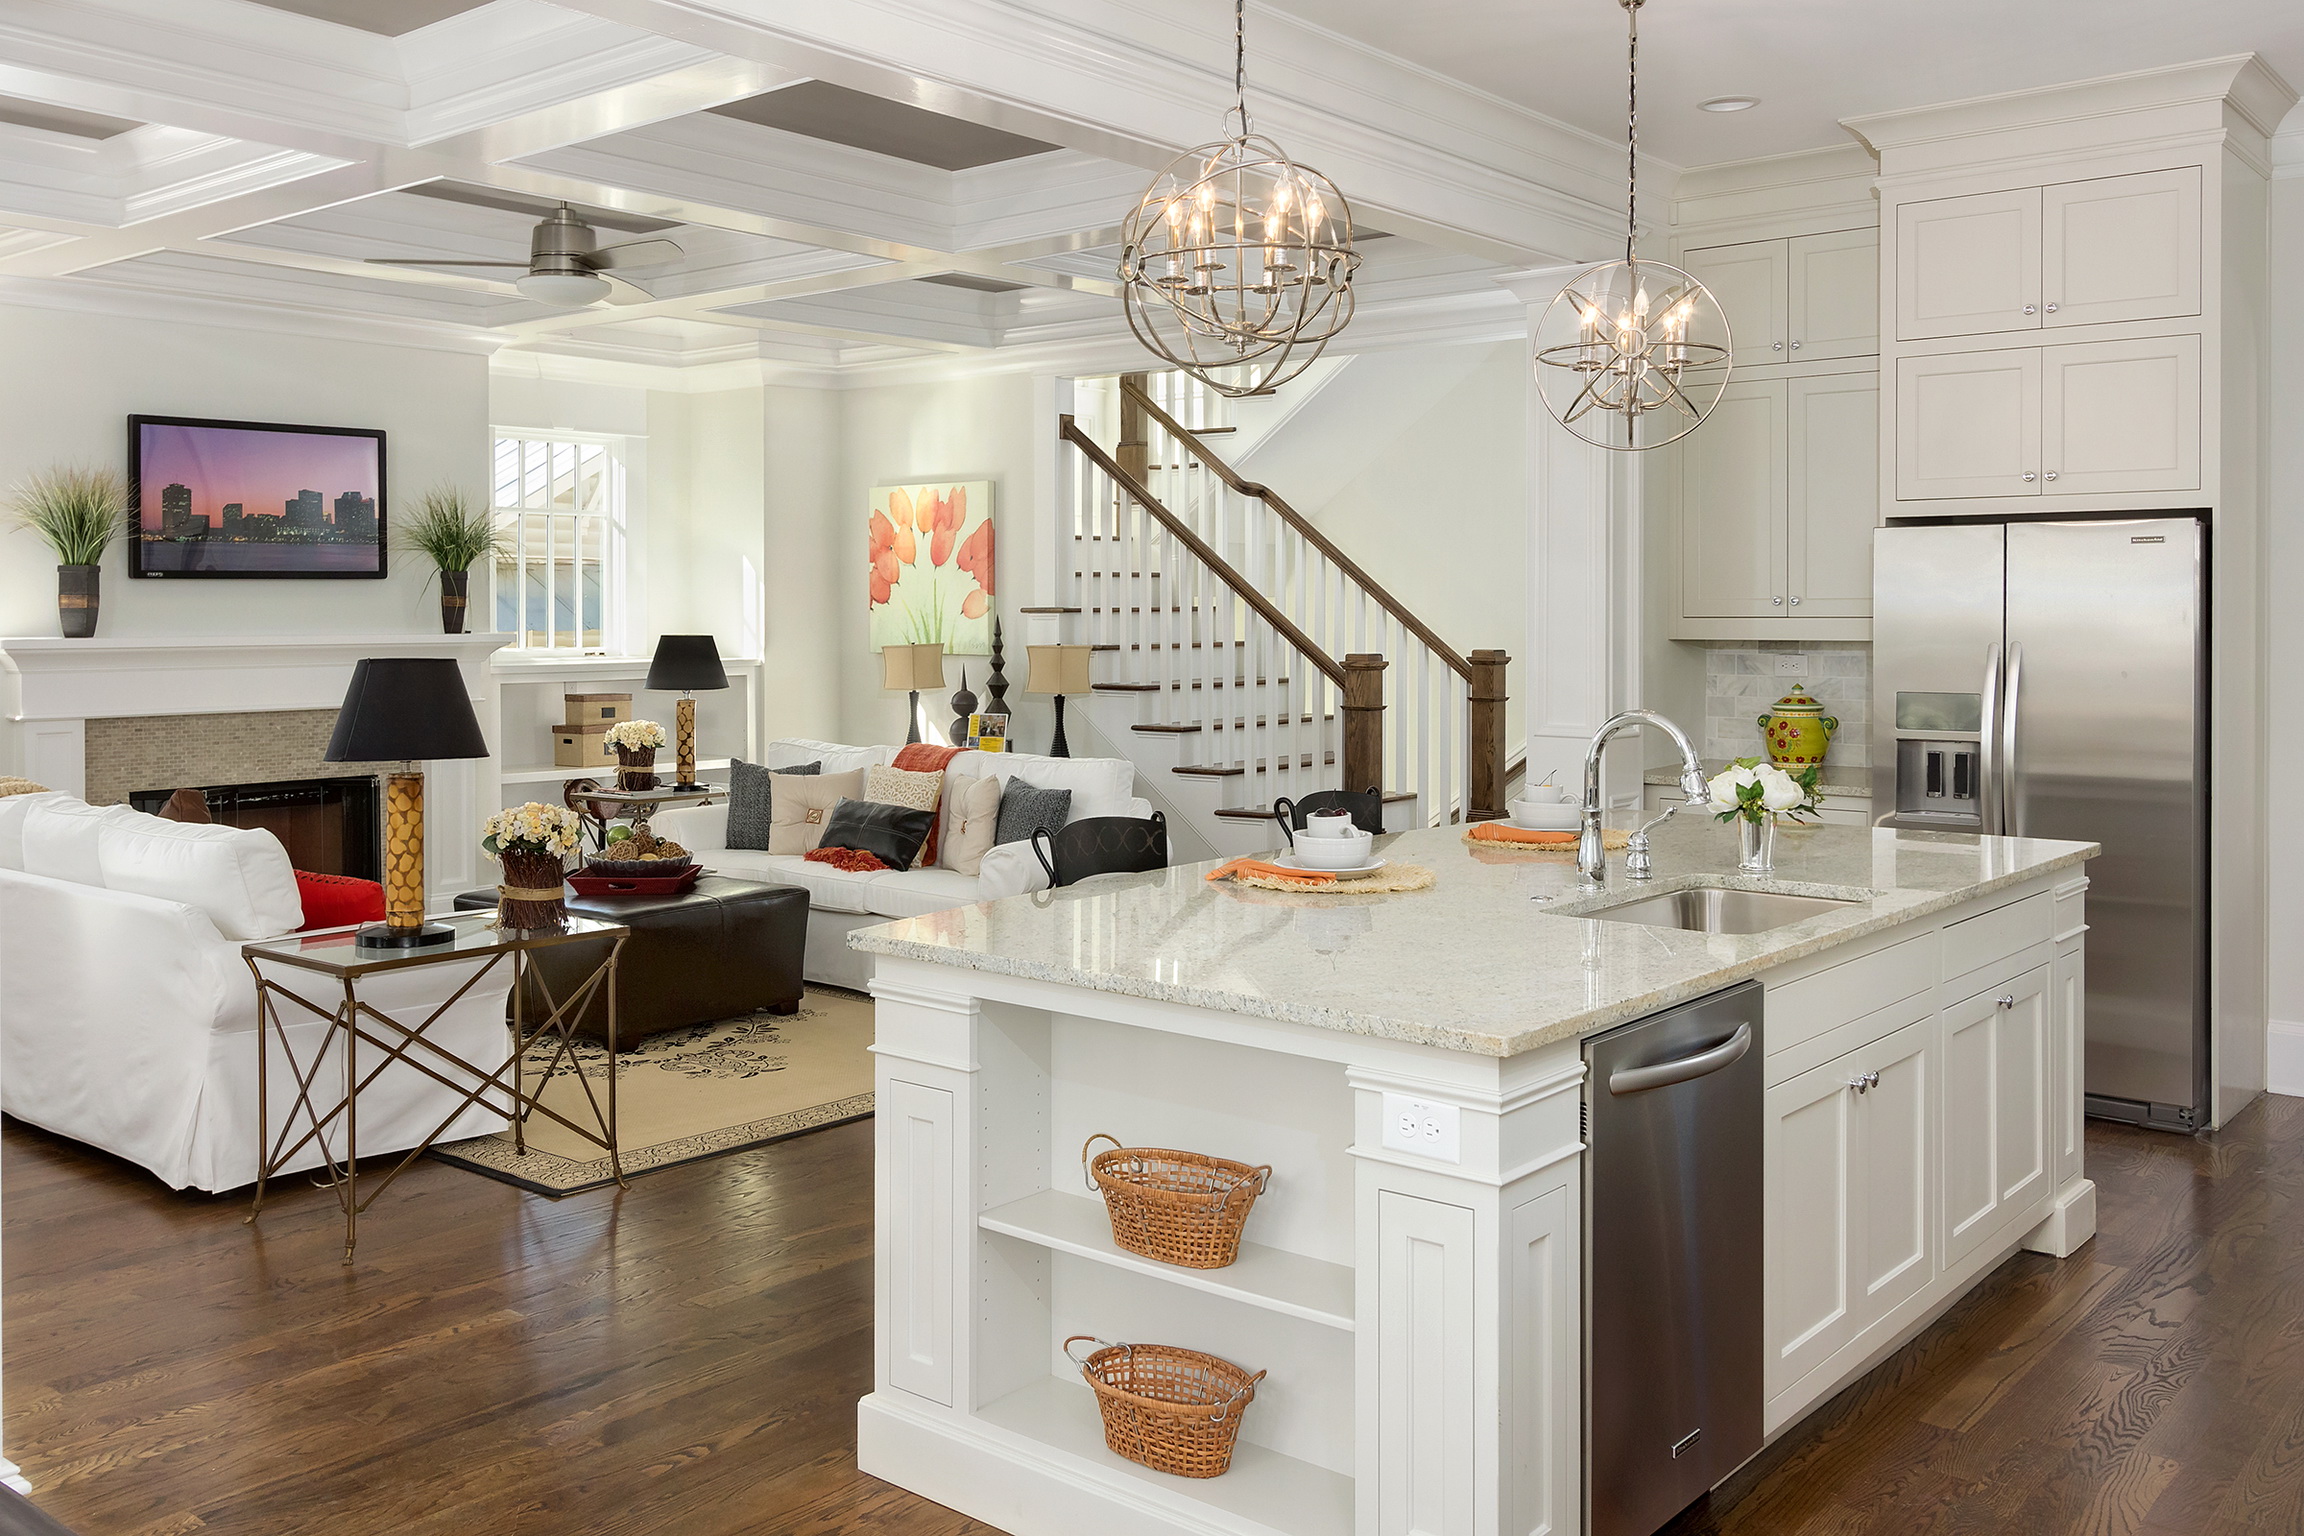 Lighting Your Kitchen With A Chandelier – 12 Illuminating Ideas